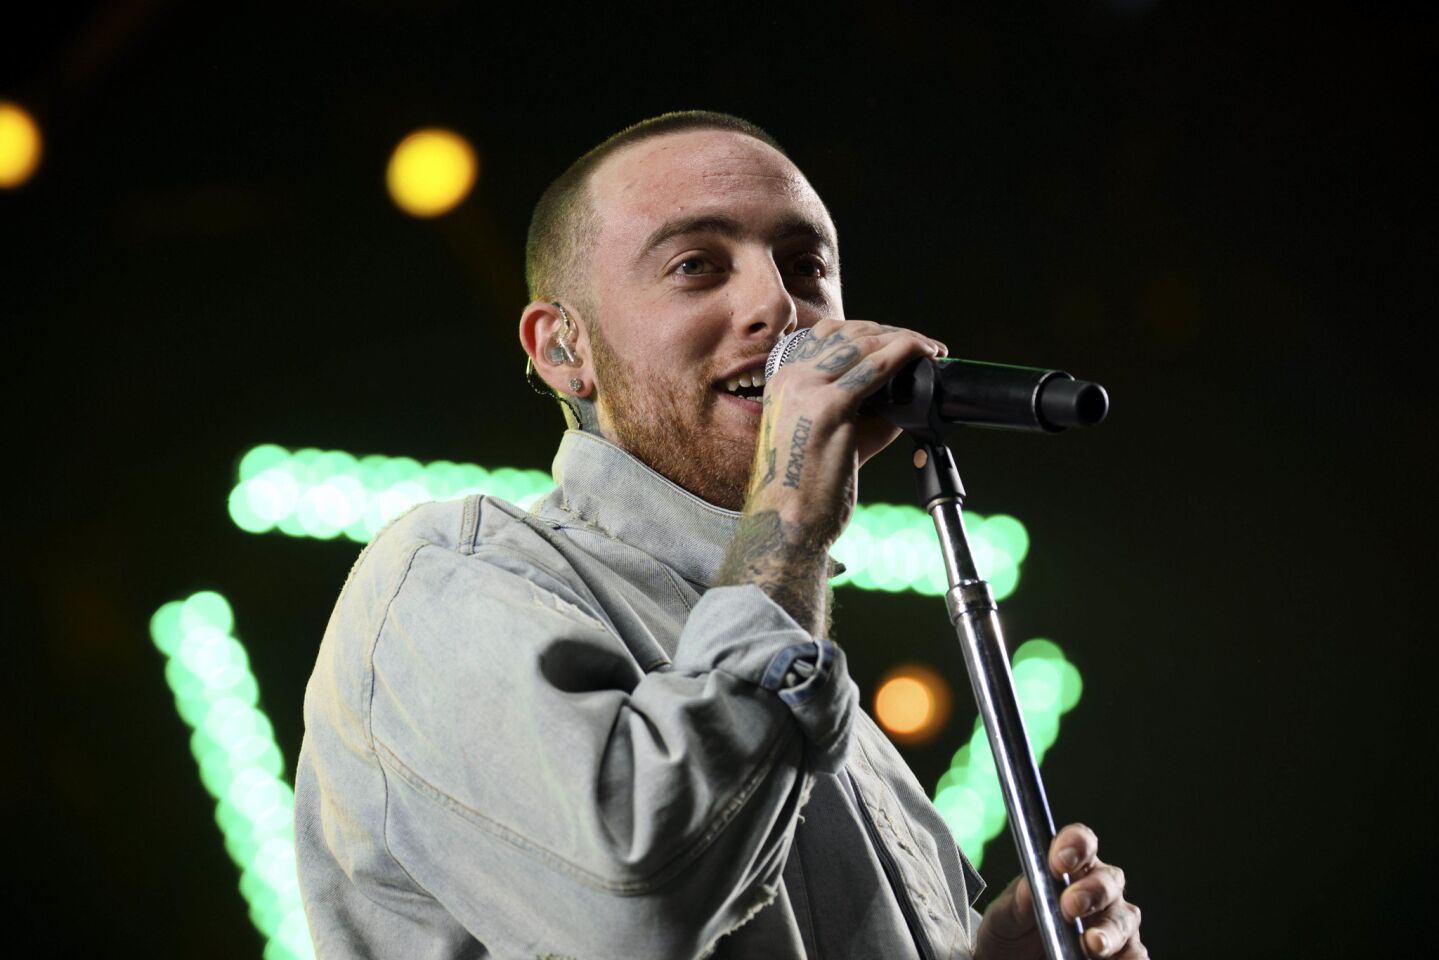 Rapper Mac Miller performs live on stage during weekend one of the three-day Coachella Valley Music and Arts Festival at the Empire Polo Grounds on Friday, April 14, 2017 in Indio, Calif. (Patrick T. Fallon/ For The Los Angeles Times)